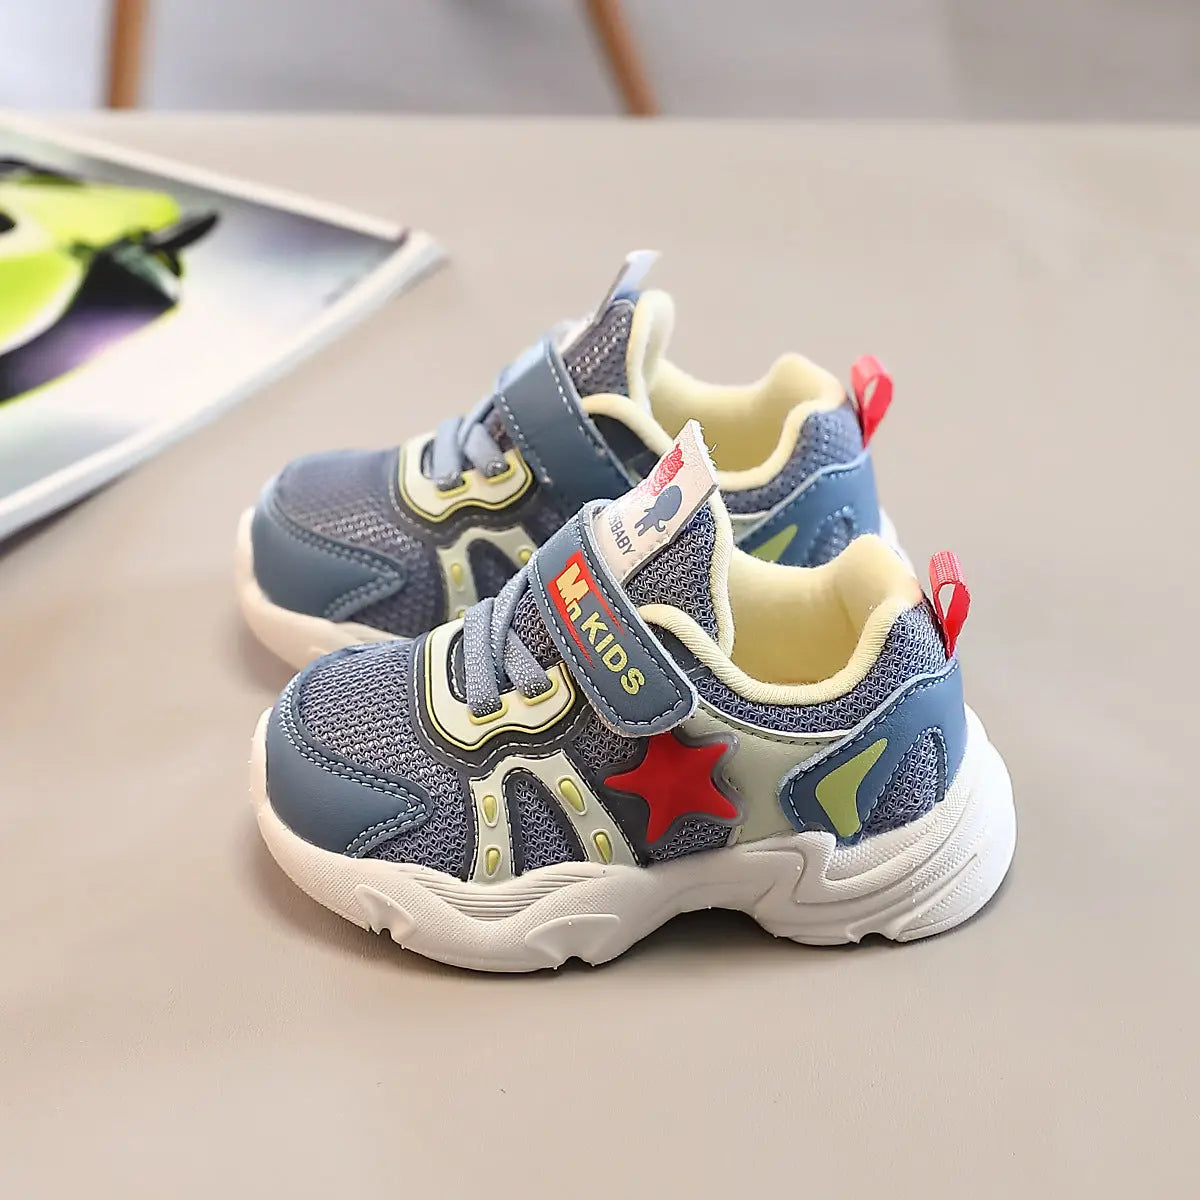 Children's Soft-soled Sneakers Are Light And Fashionable For Kids - Season Prestige